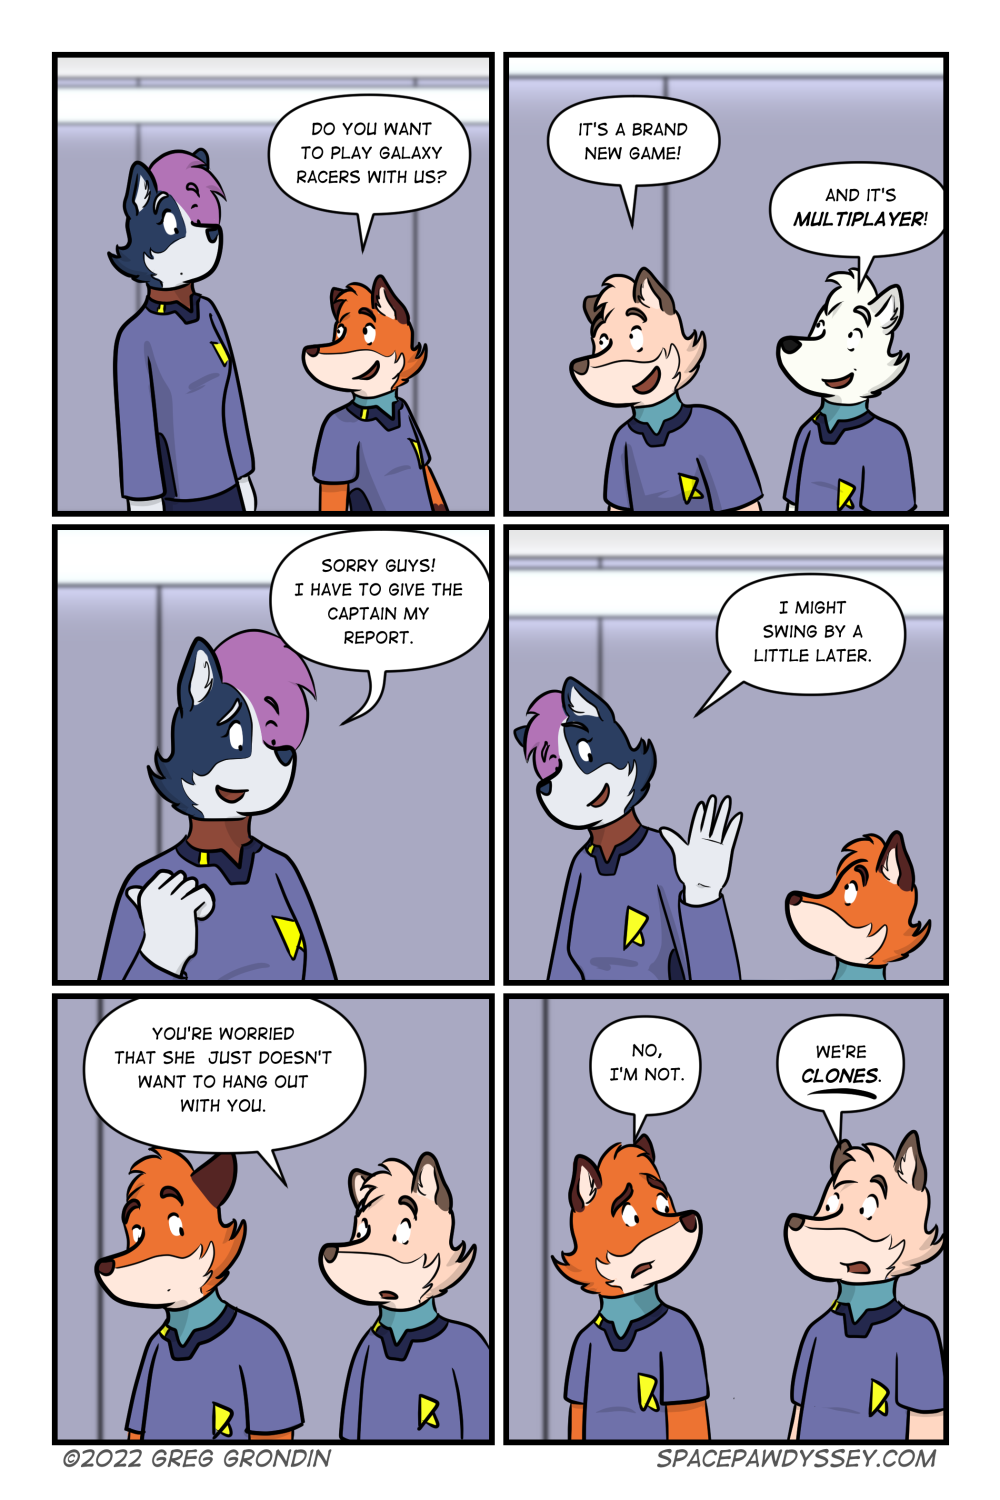 Space Pawdyssey #605